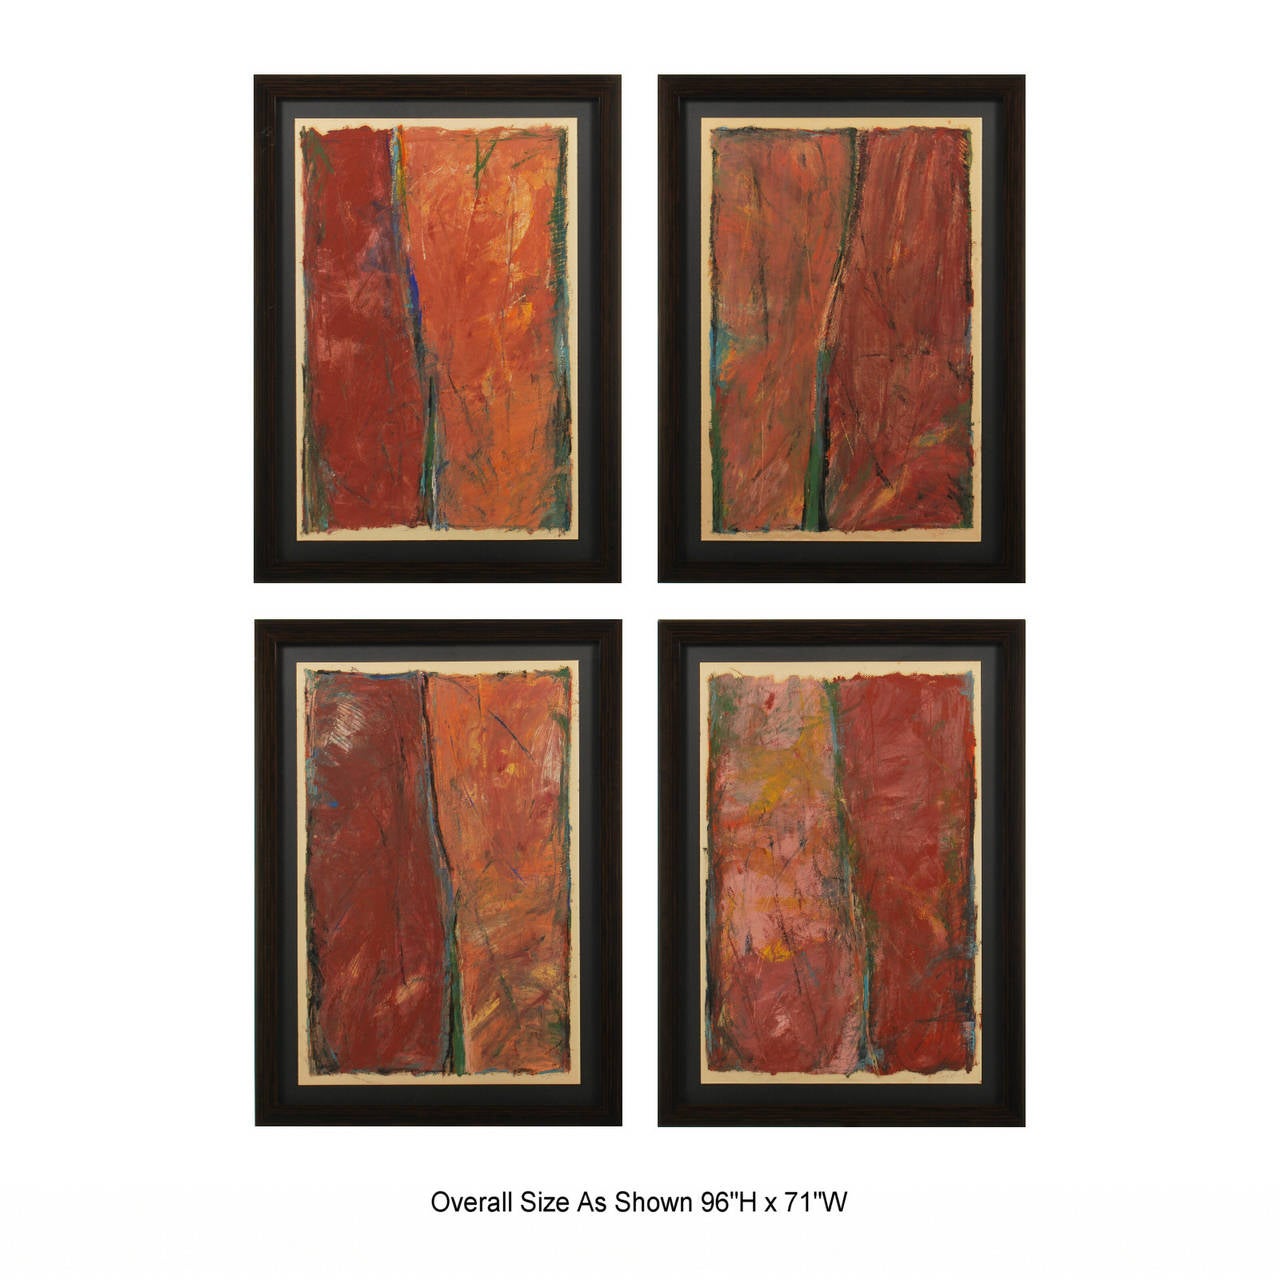 Striking set of four signed original Abstract paintings, floated against black mats and framed in Macassar wood frames. The paintings are all signed originals, they are not prints or limited editions. The signatures appear to read Clifford, but that